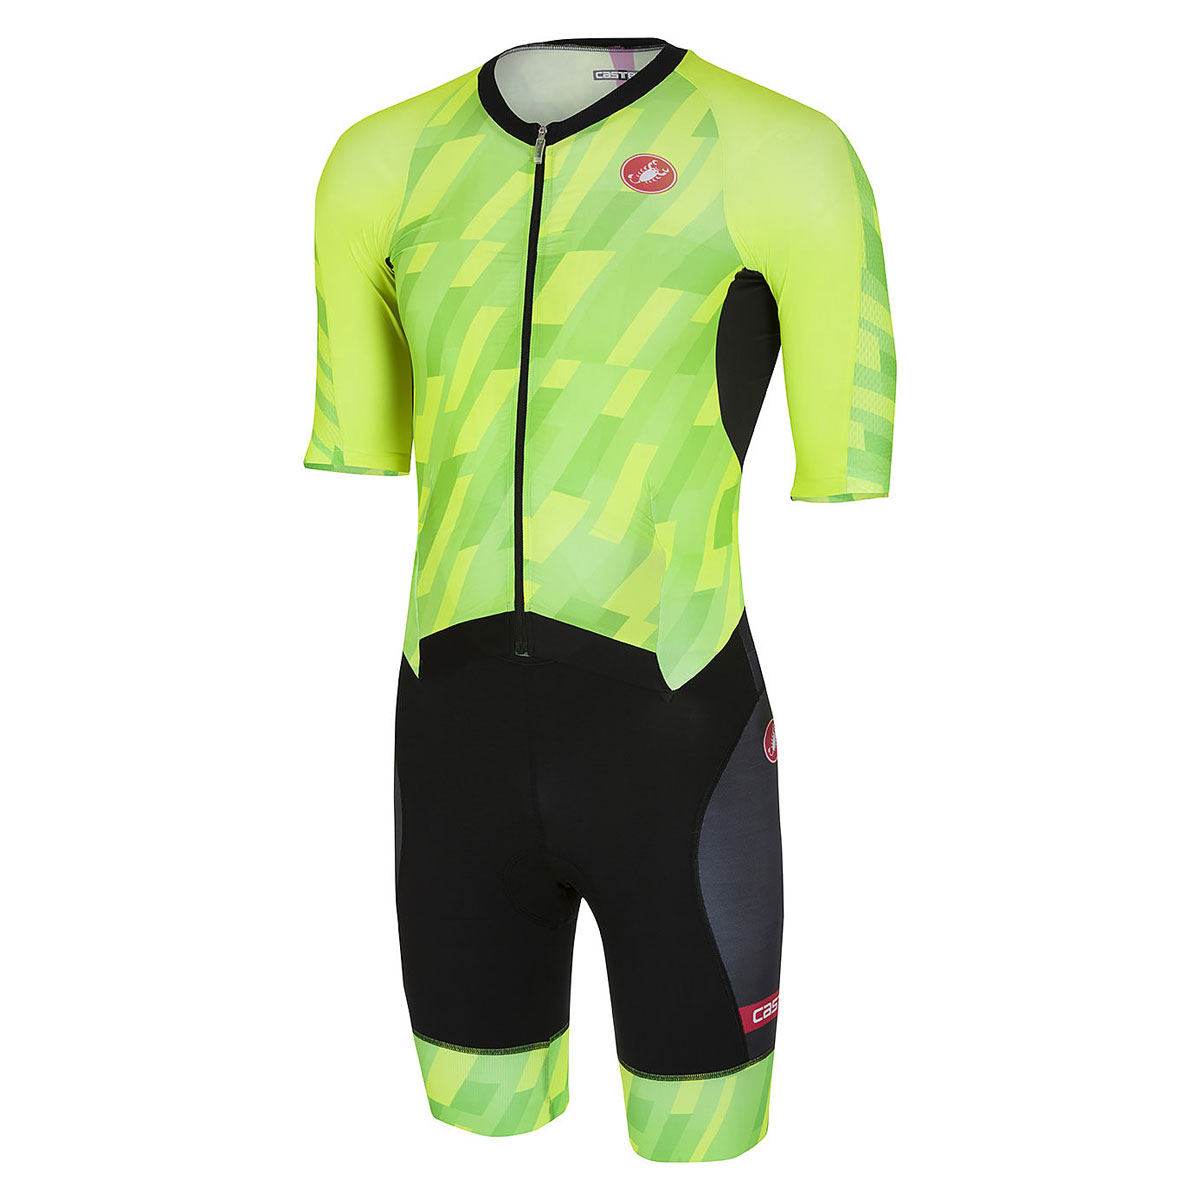 TRI-SUIT CASTELLI ALL OUT SPEED